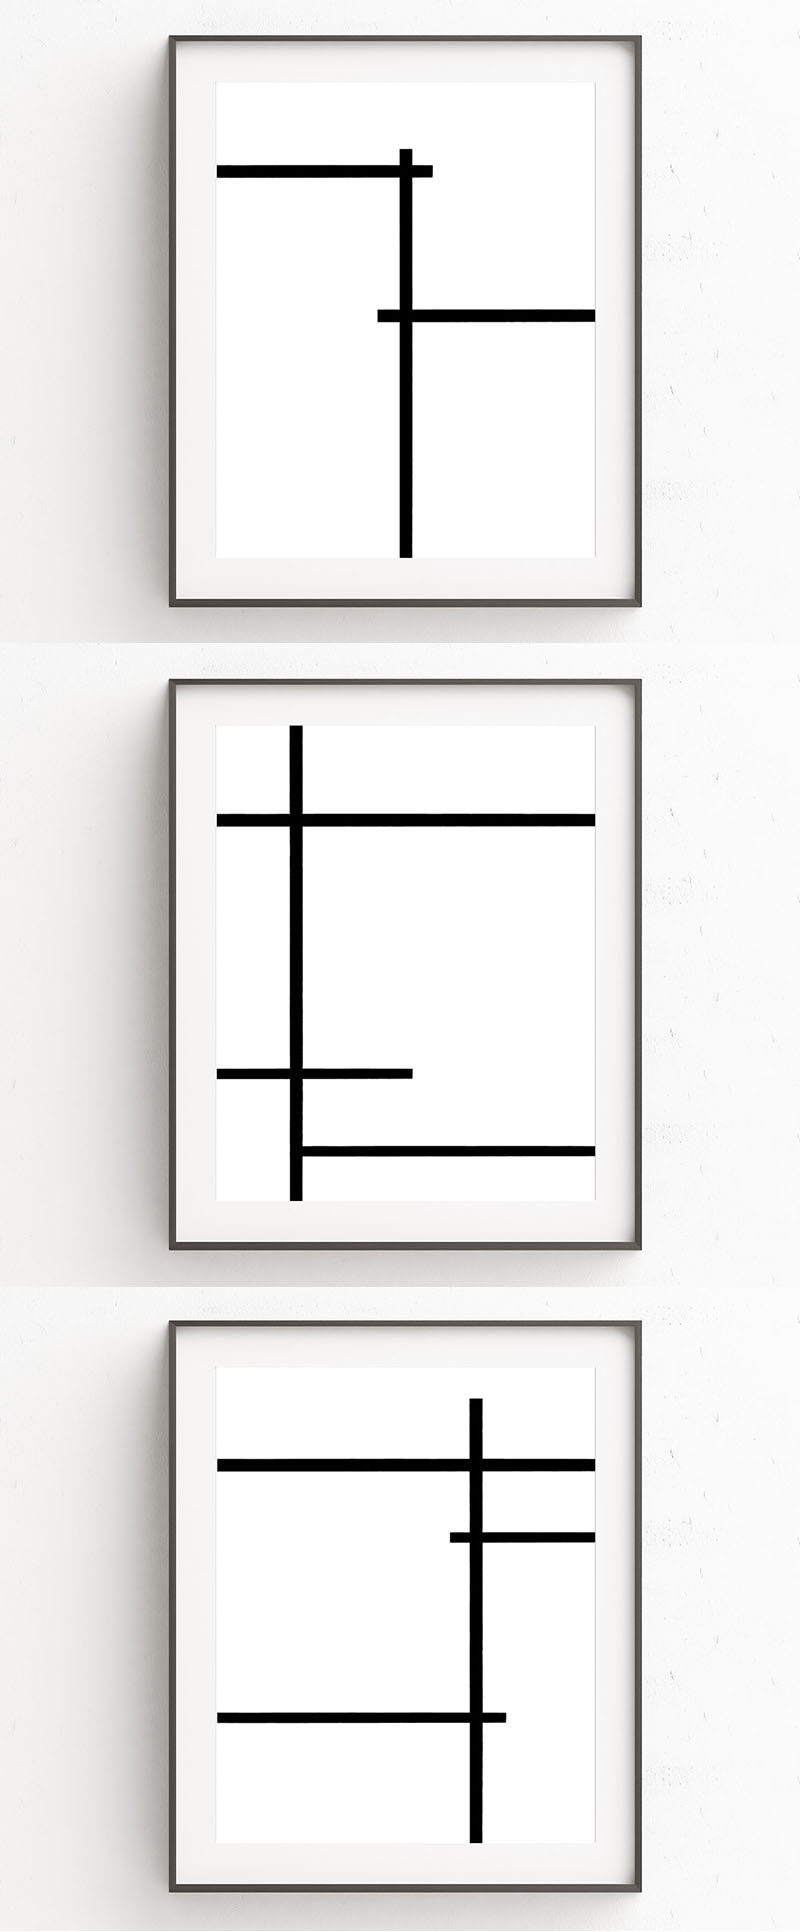 Oju Design has created this collection of 3 minimalist art prints that use bold black lines to break up the all white background.